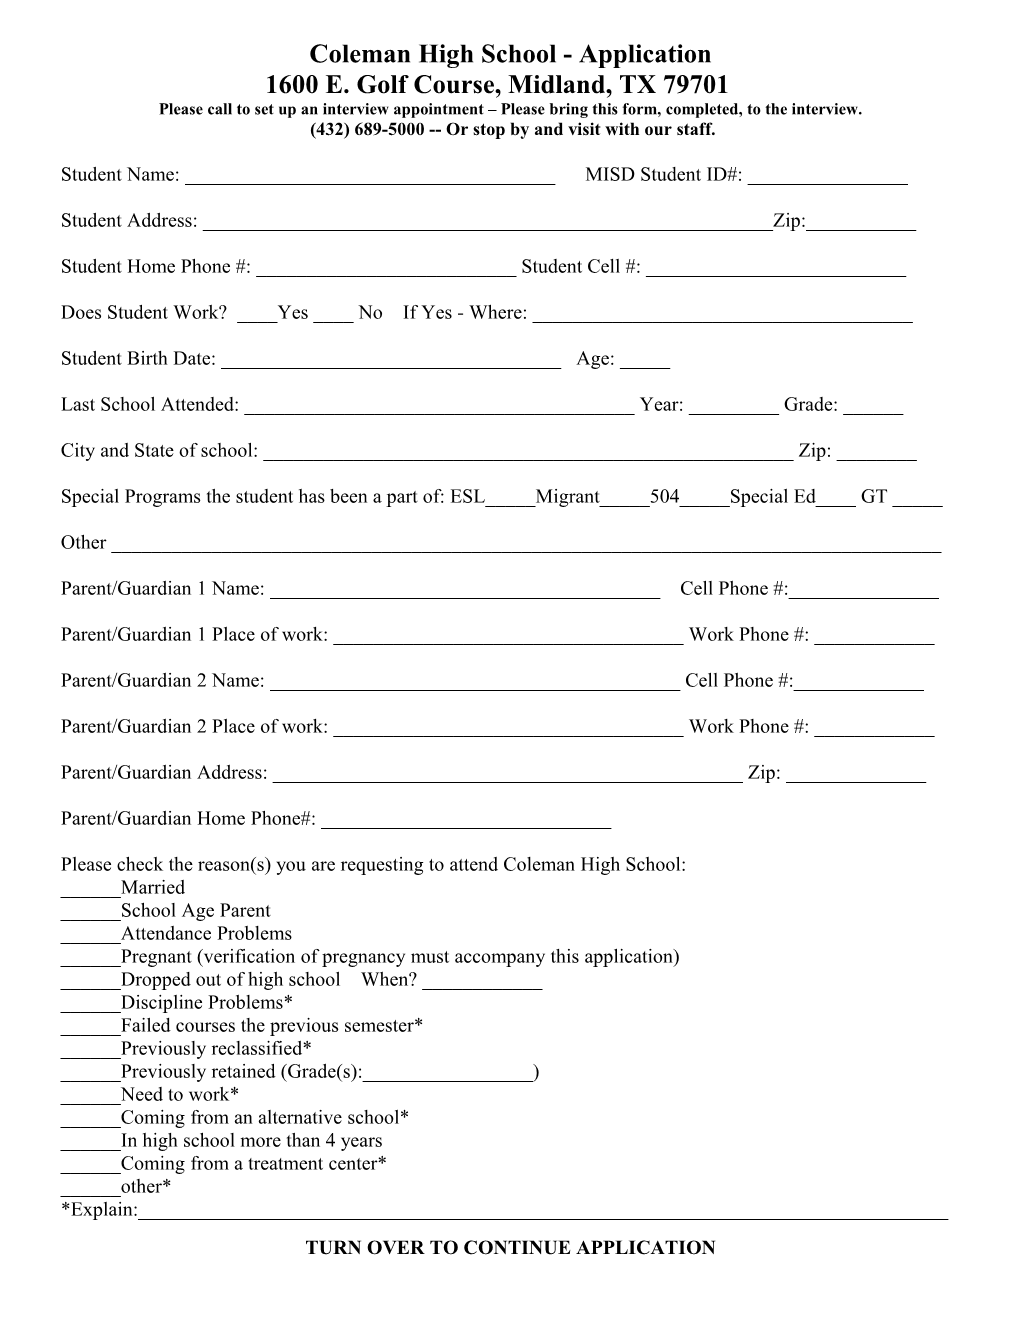 Application to Coleman High School